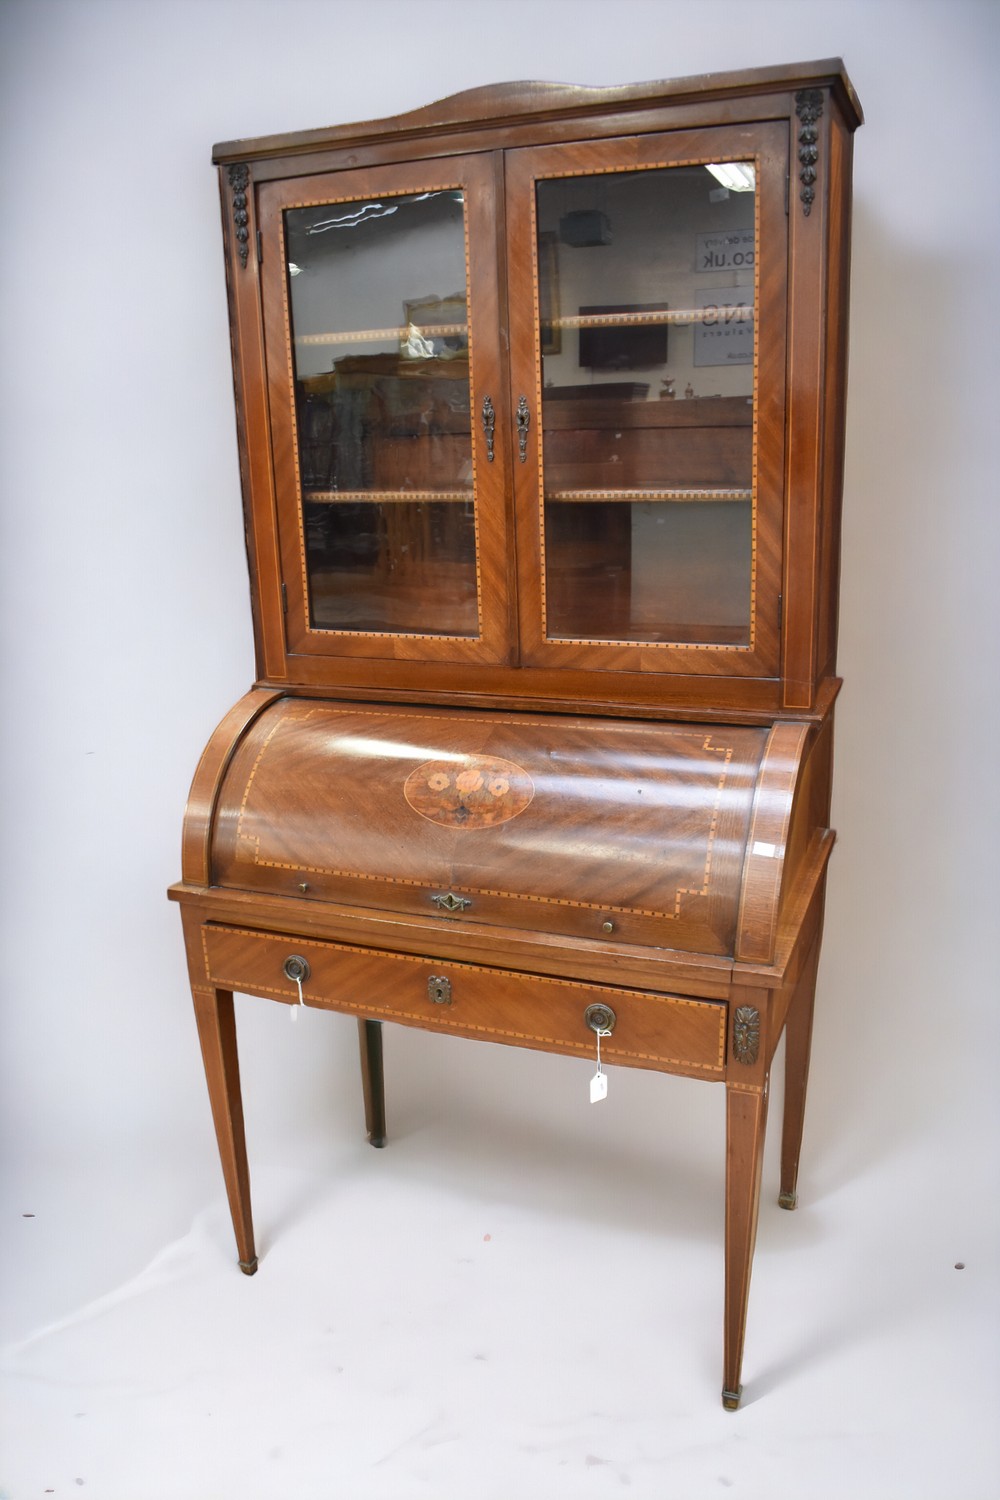 An Edwardian glazed writing bureau with cabinet top and inlaid design.